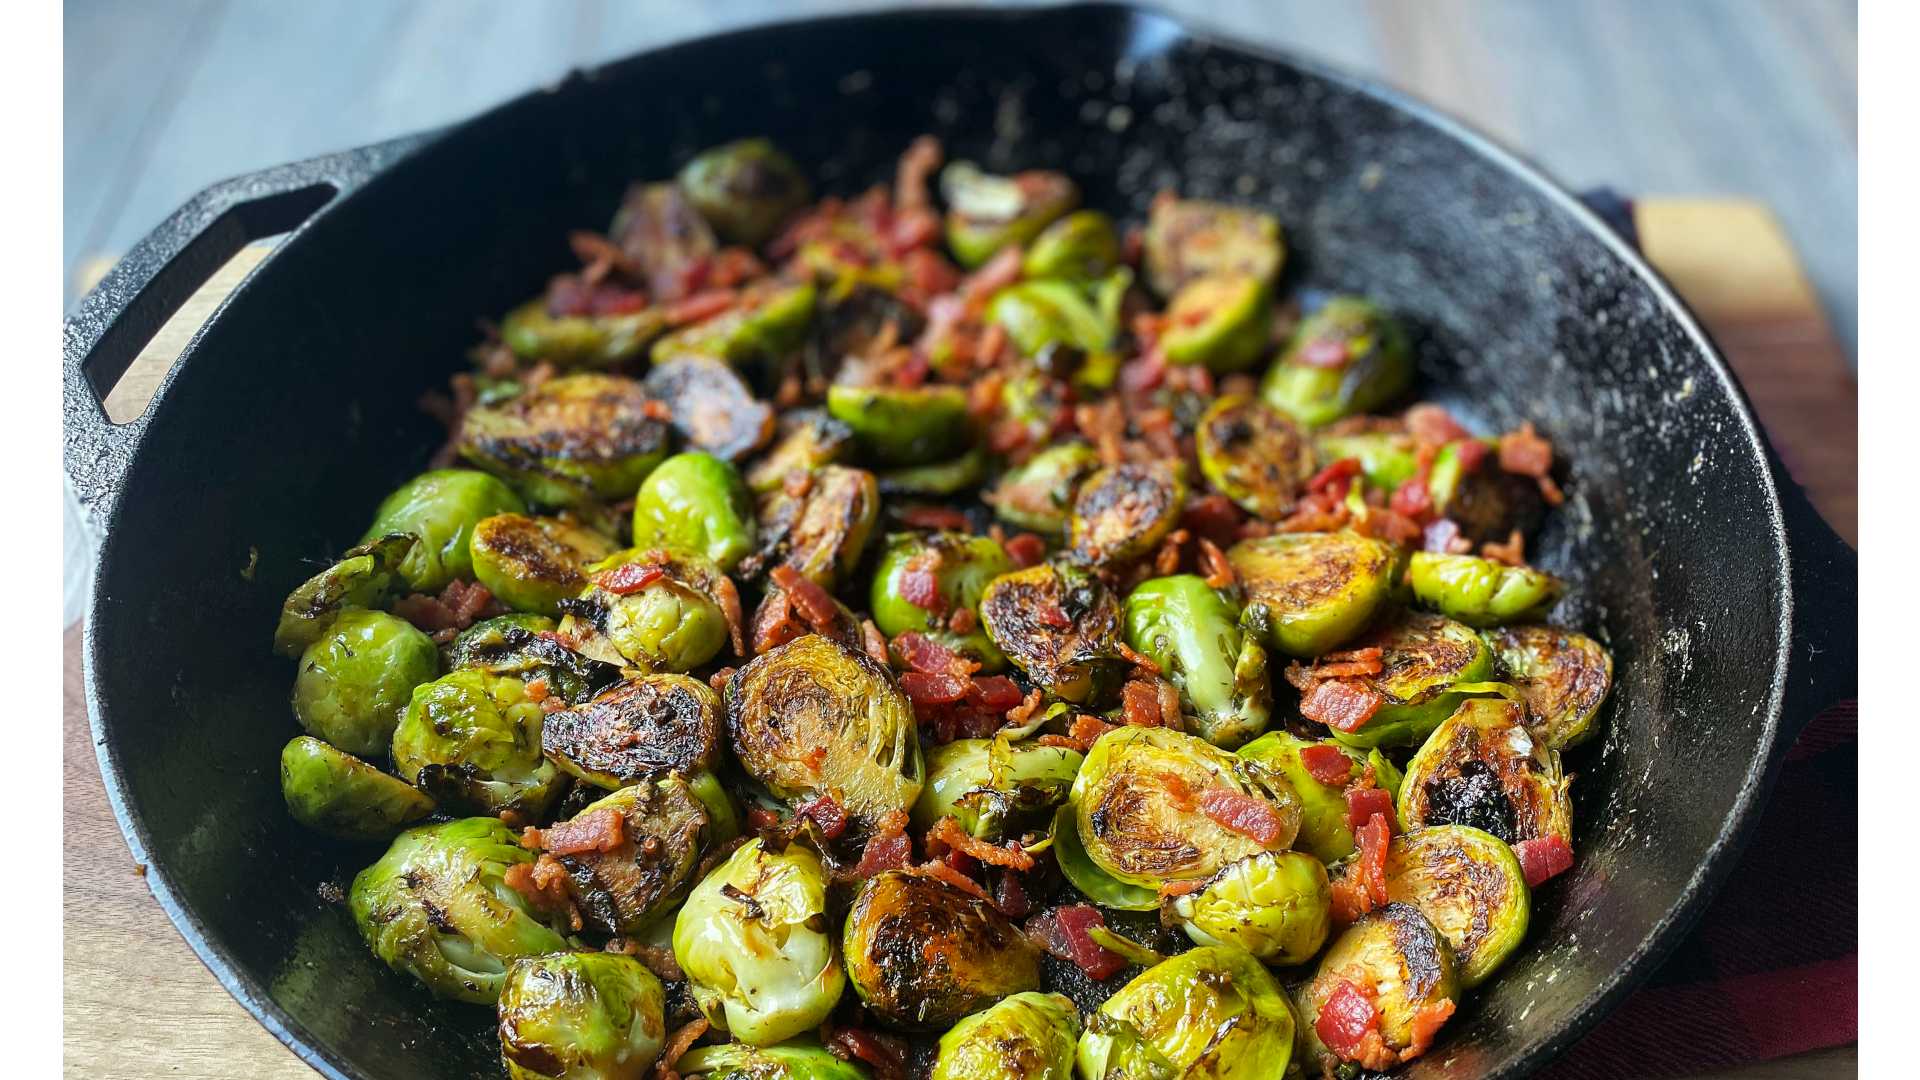 Caramelized Brussels Sprouts with Tangy Dill Dressing